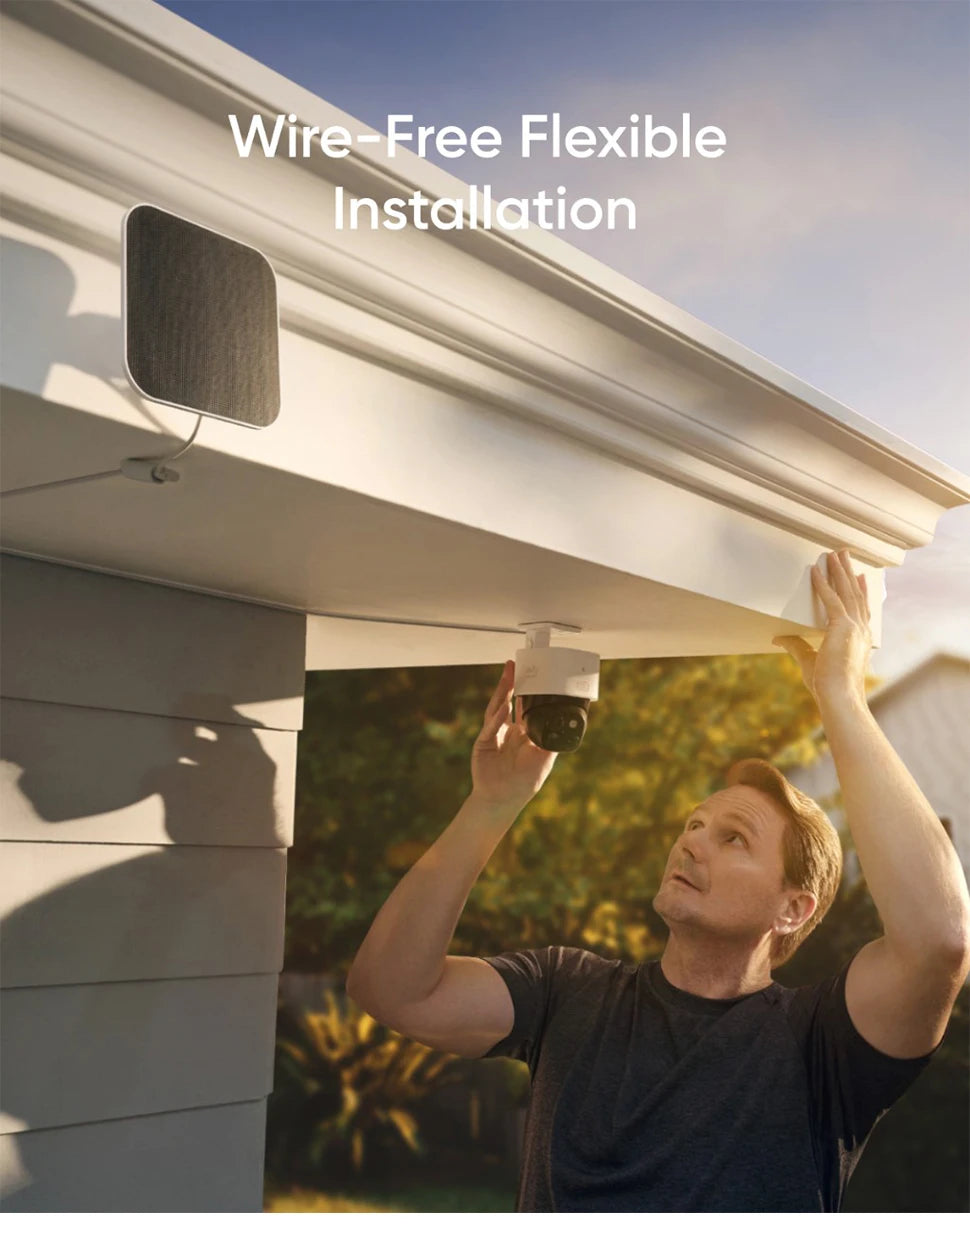 Eufy S340 SoloCam - Solar Security Camera, Easily install anywhere with wireless flexibility